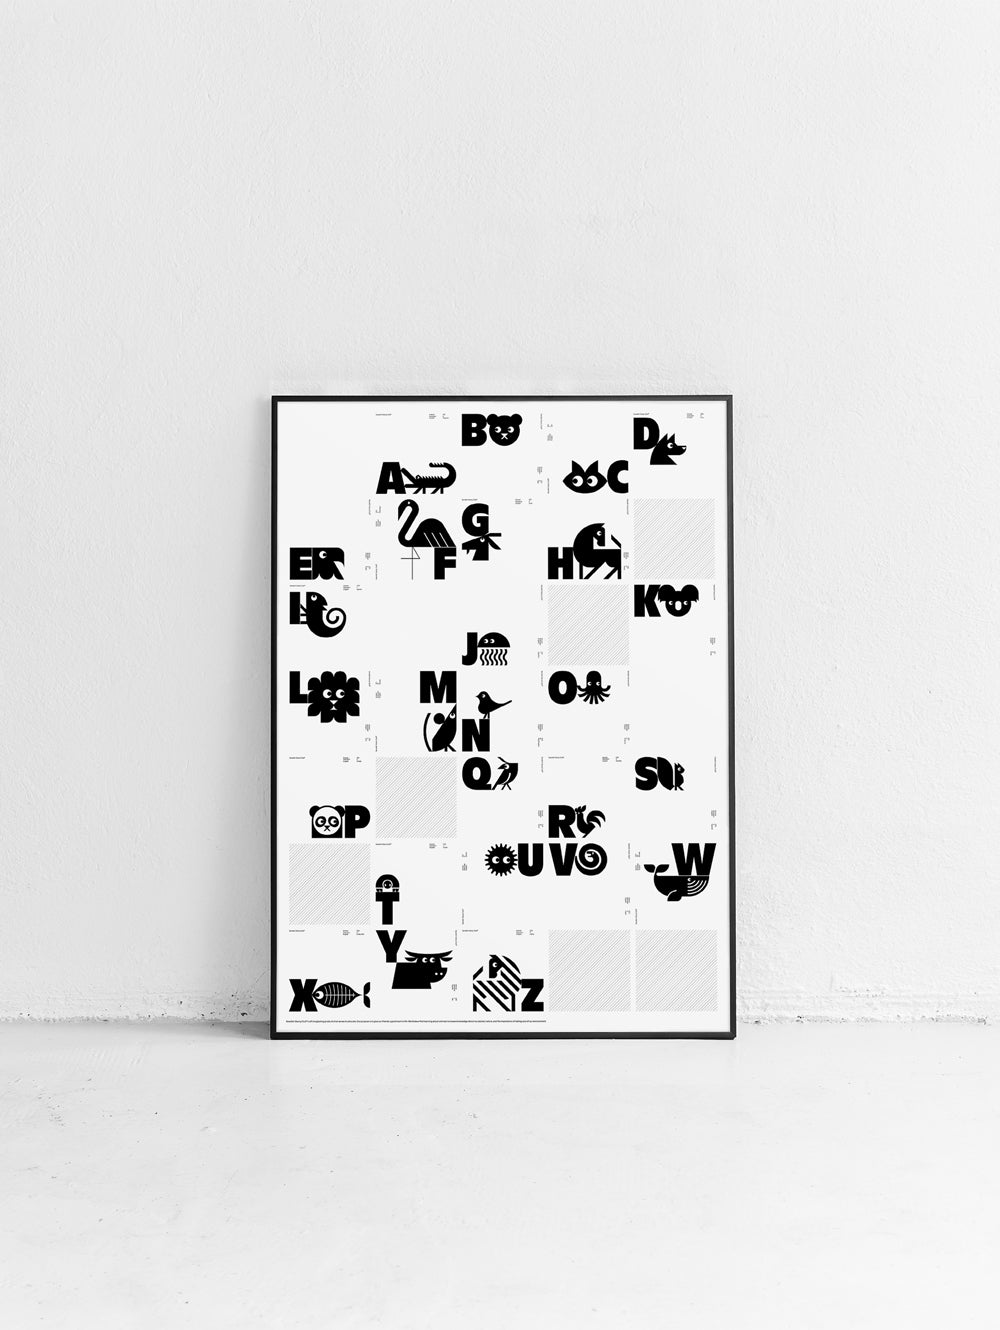 26 Days of Animals Poster